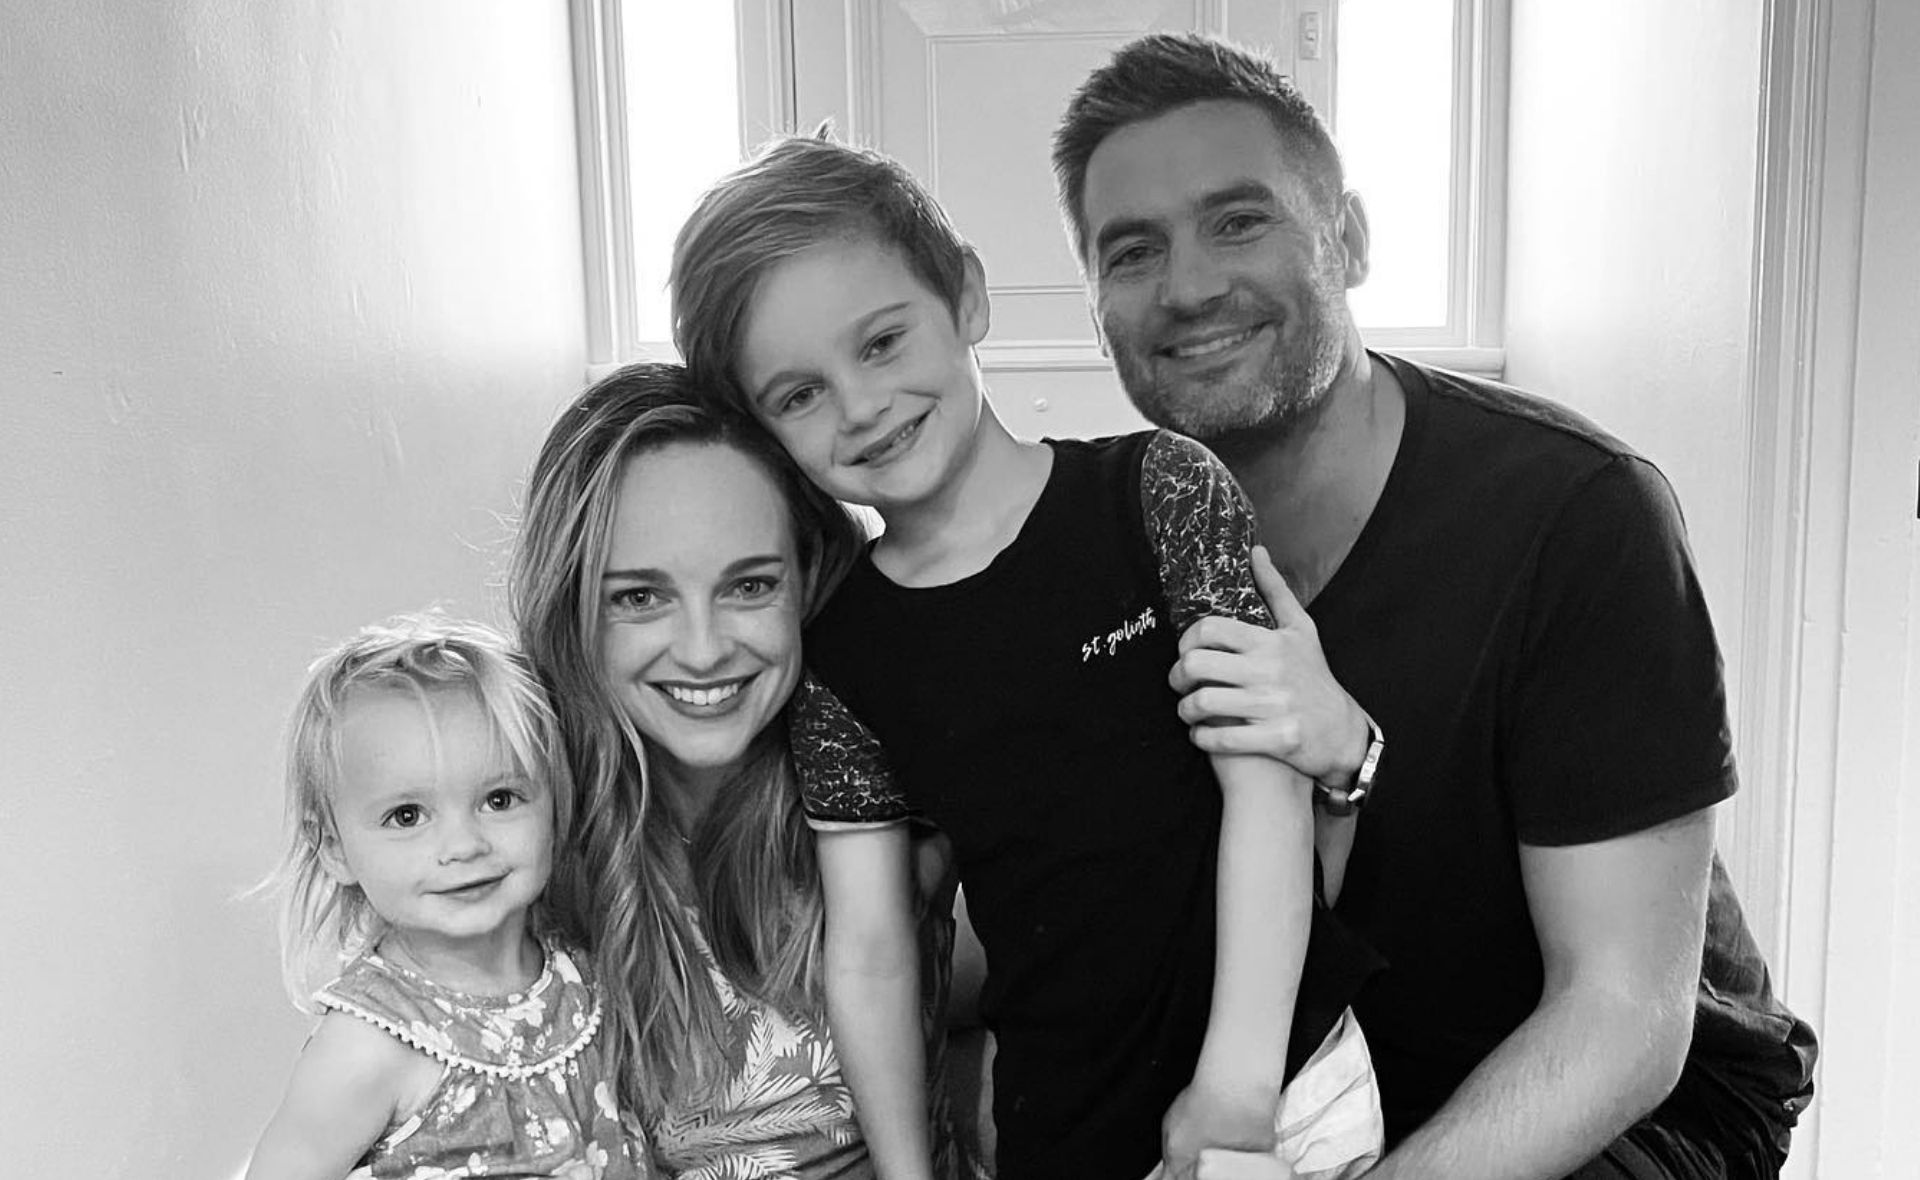 Former Home and Away star Penny McNamee is a proud mum-of-two – and her little ones will steal your heart in 35 pictures